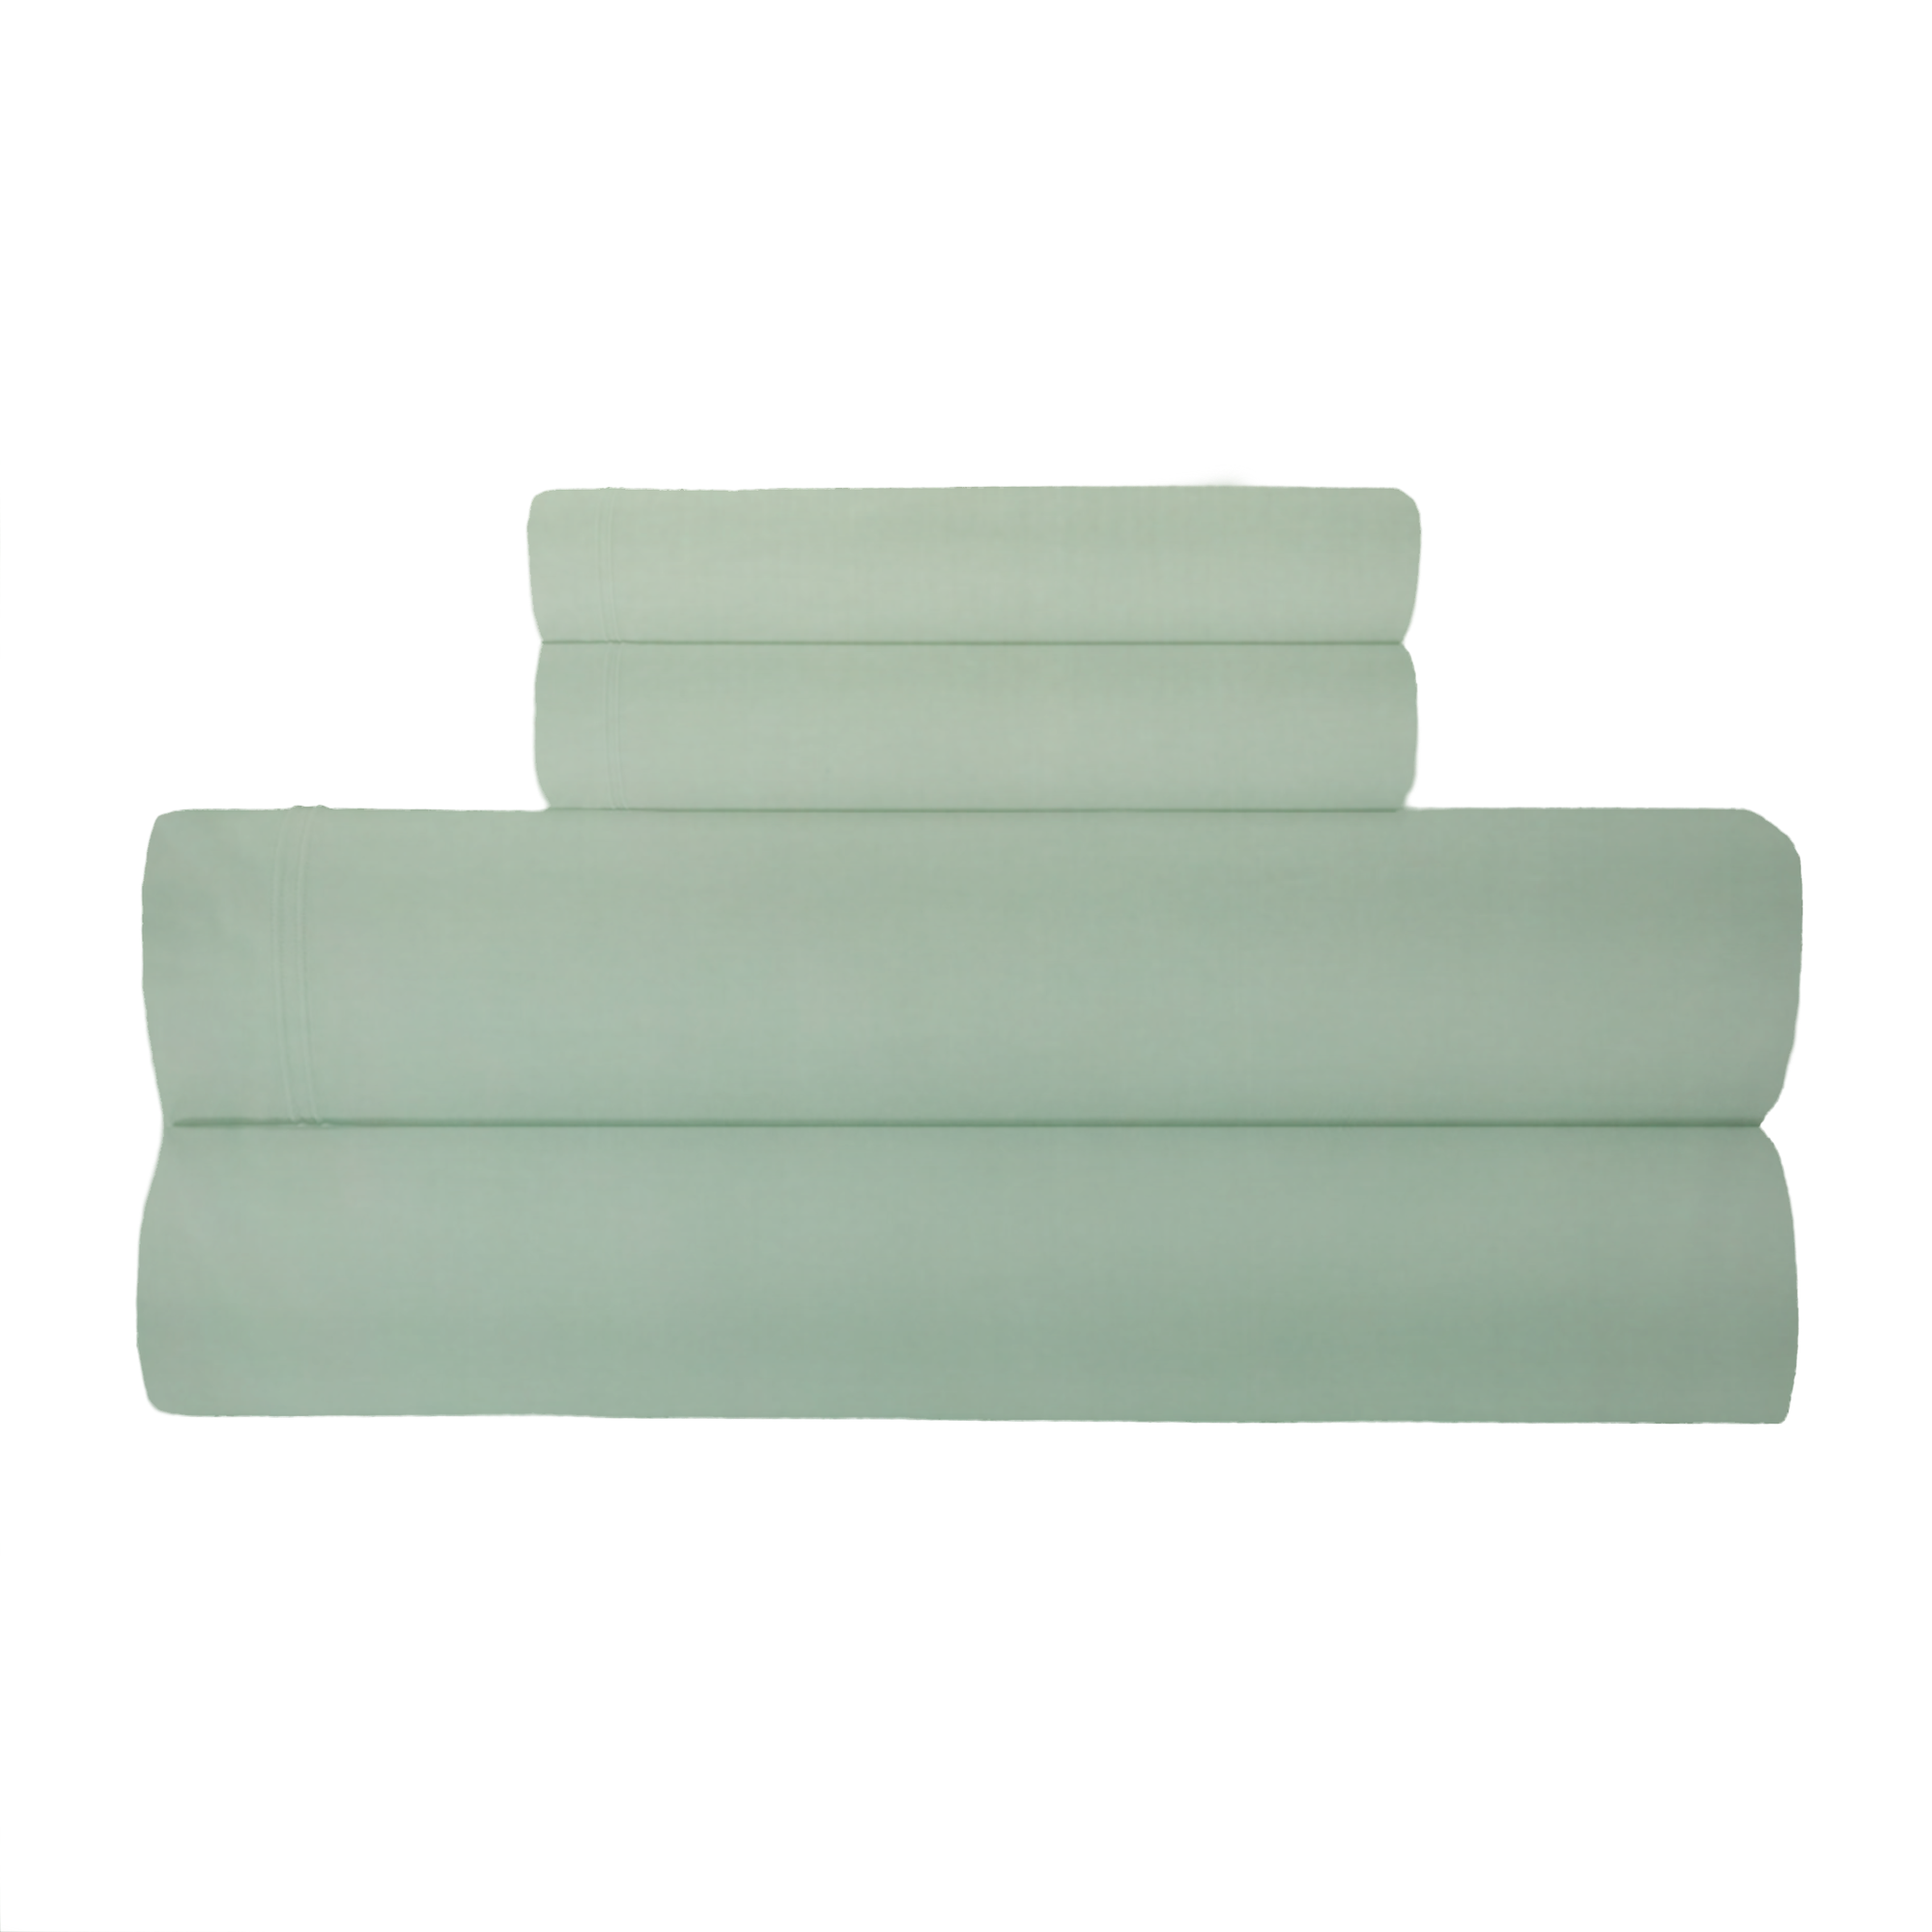 Stack of Yves Delorme Triomphe Sheet Set in Veronese Color